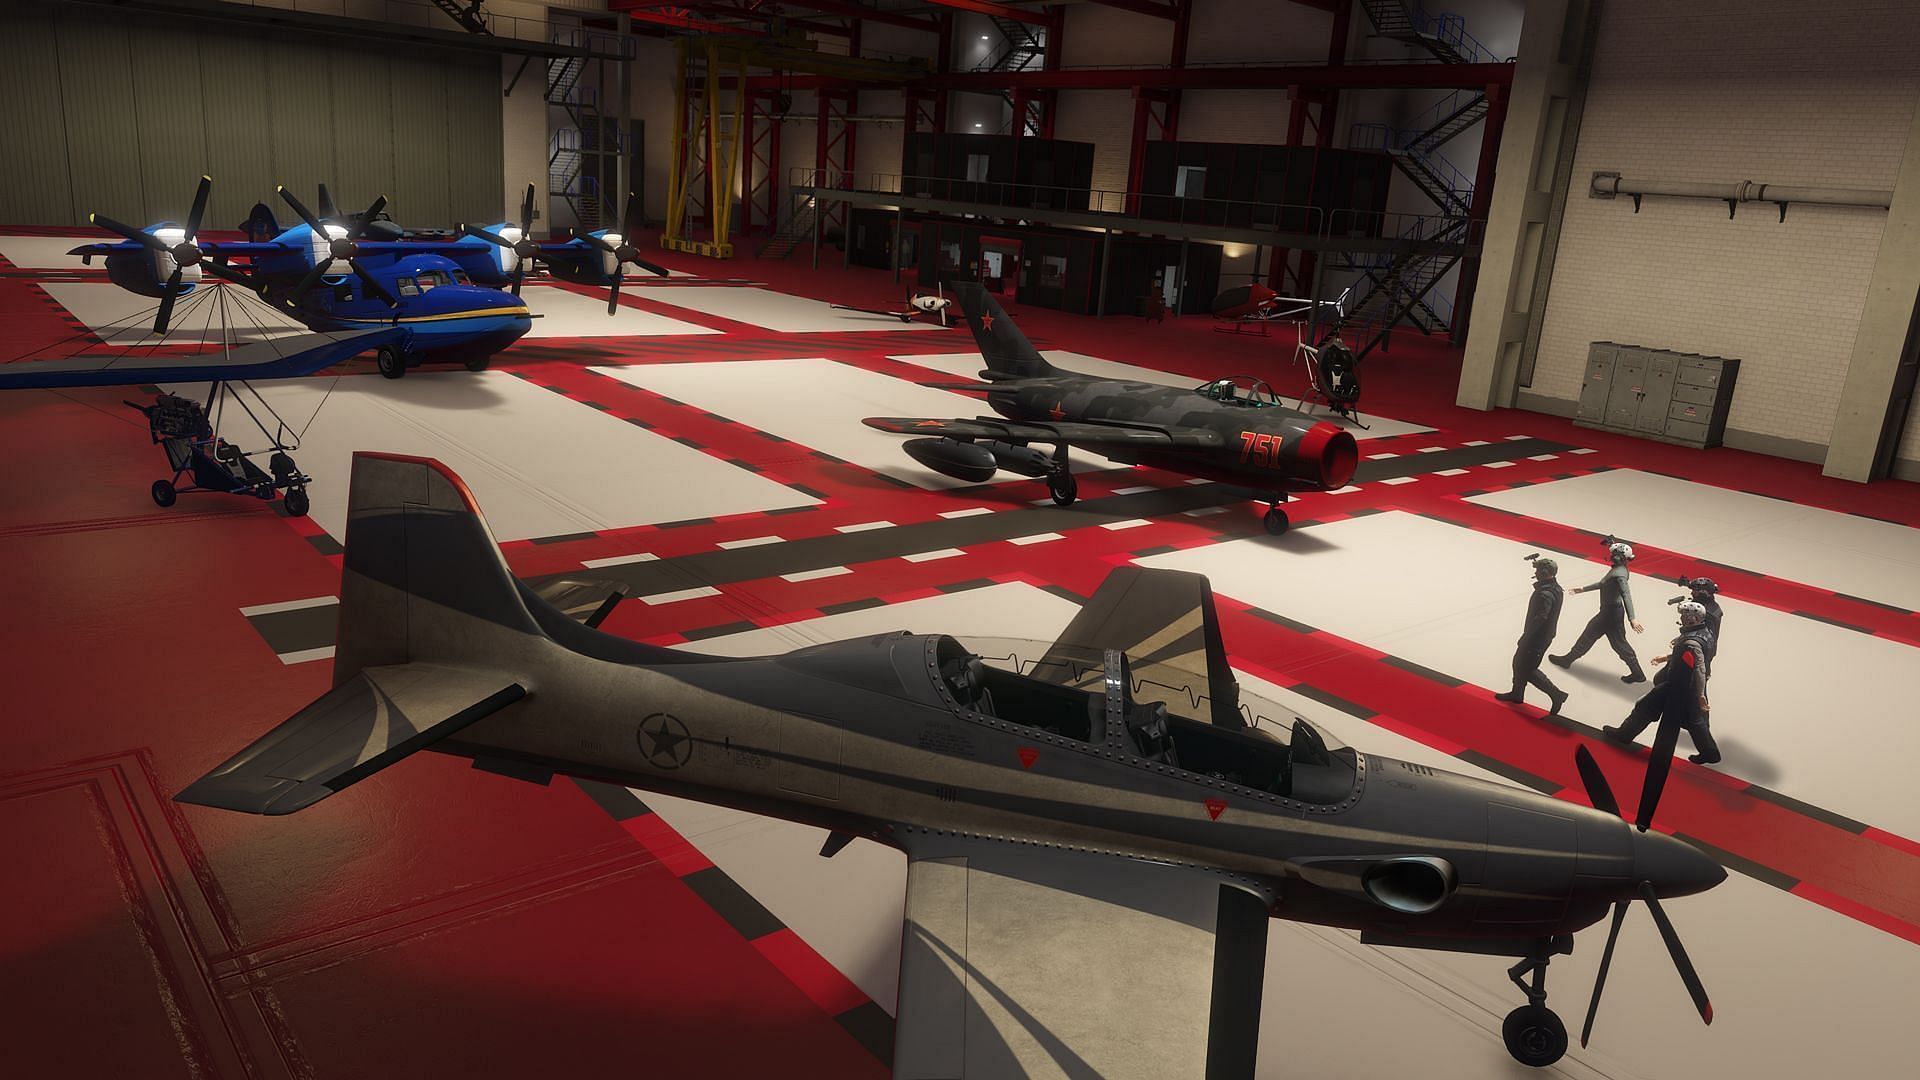 The Hangar is a great property for skilled aviators (Image via Rockstar Games)